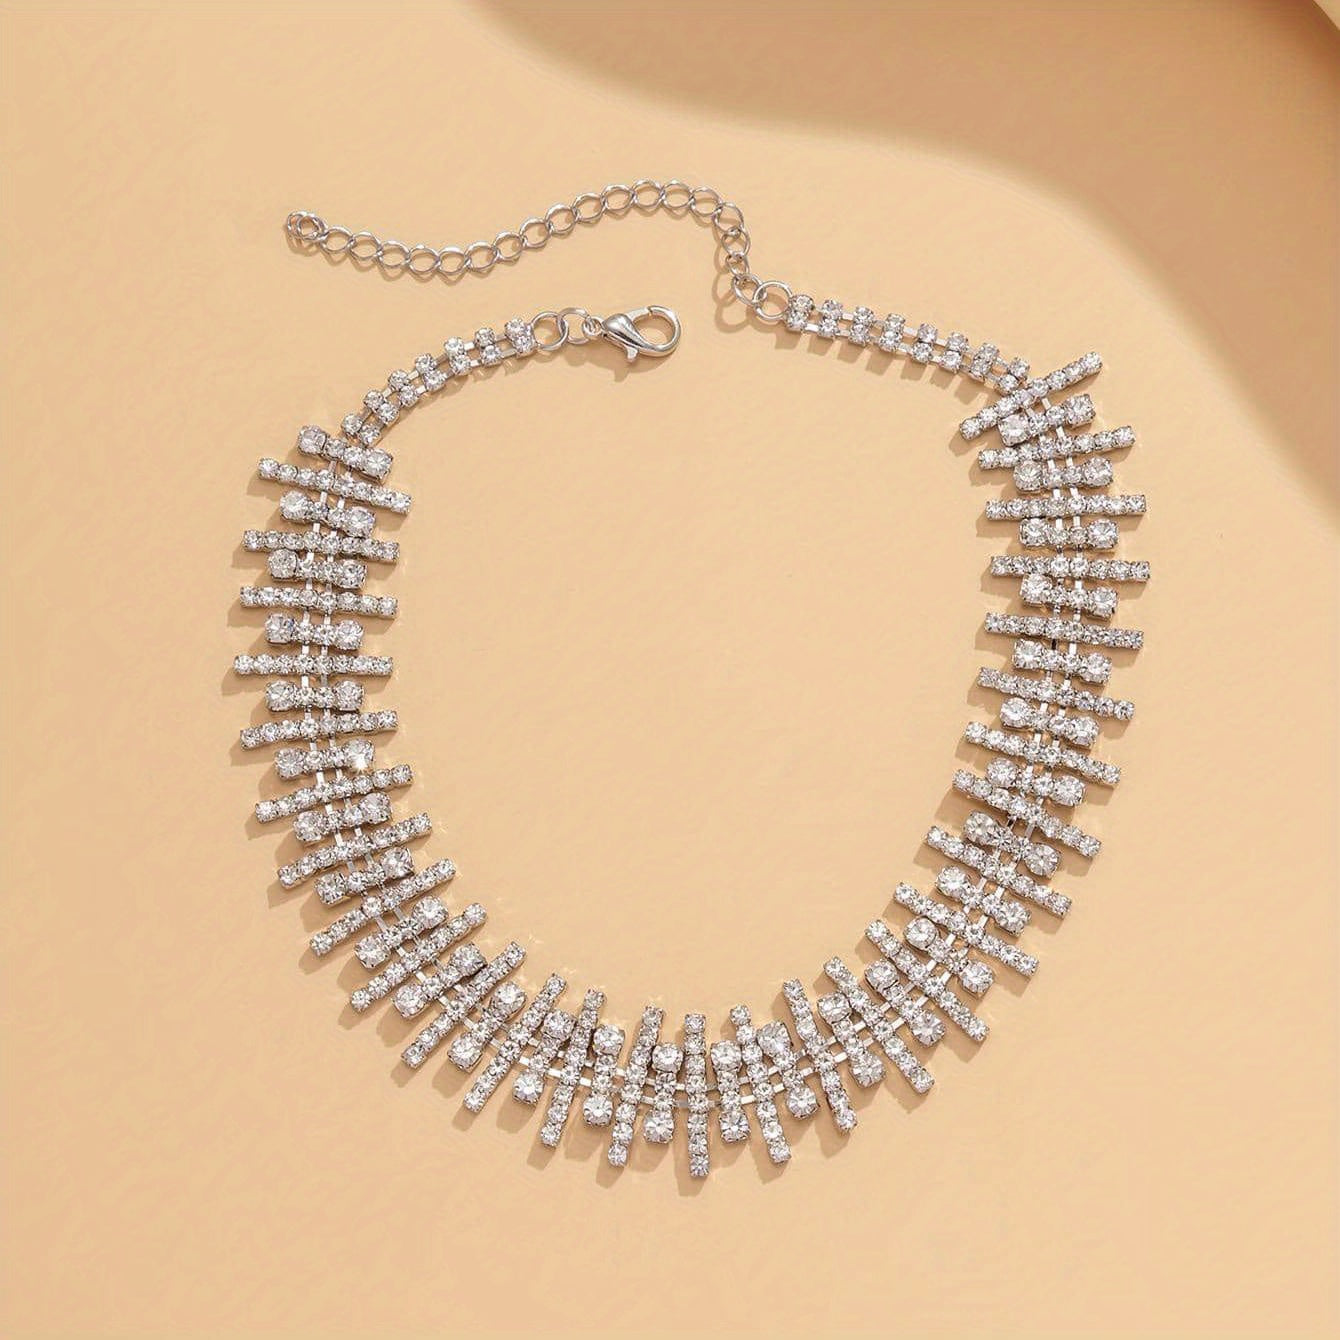 Luxury Exaggerated Glitter Crystal Blingbling Neck Chain Necklace Party Wedding Accessories